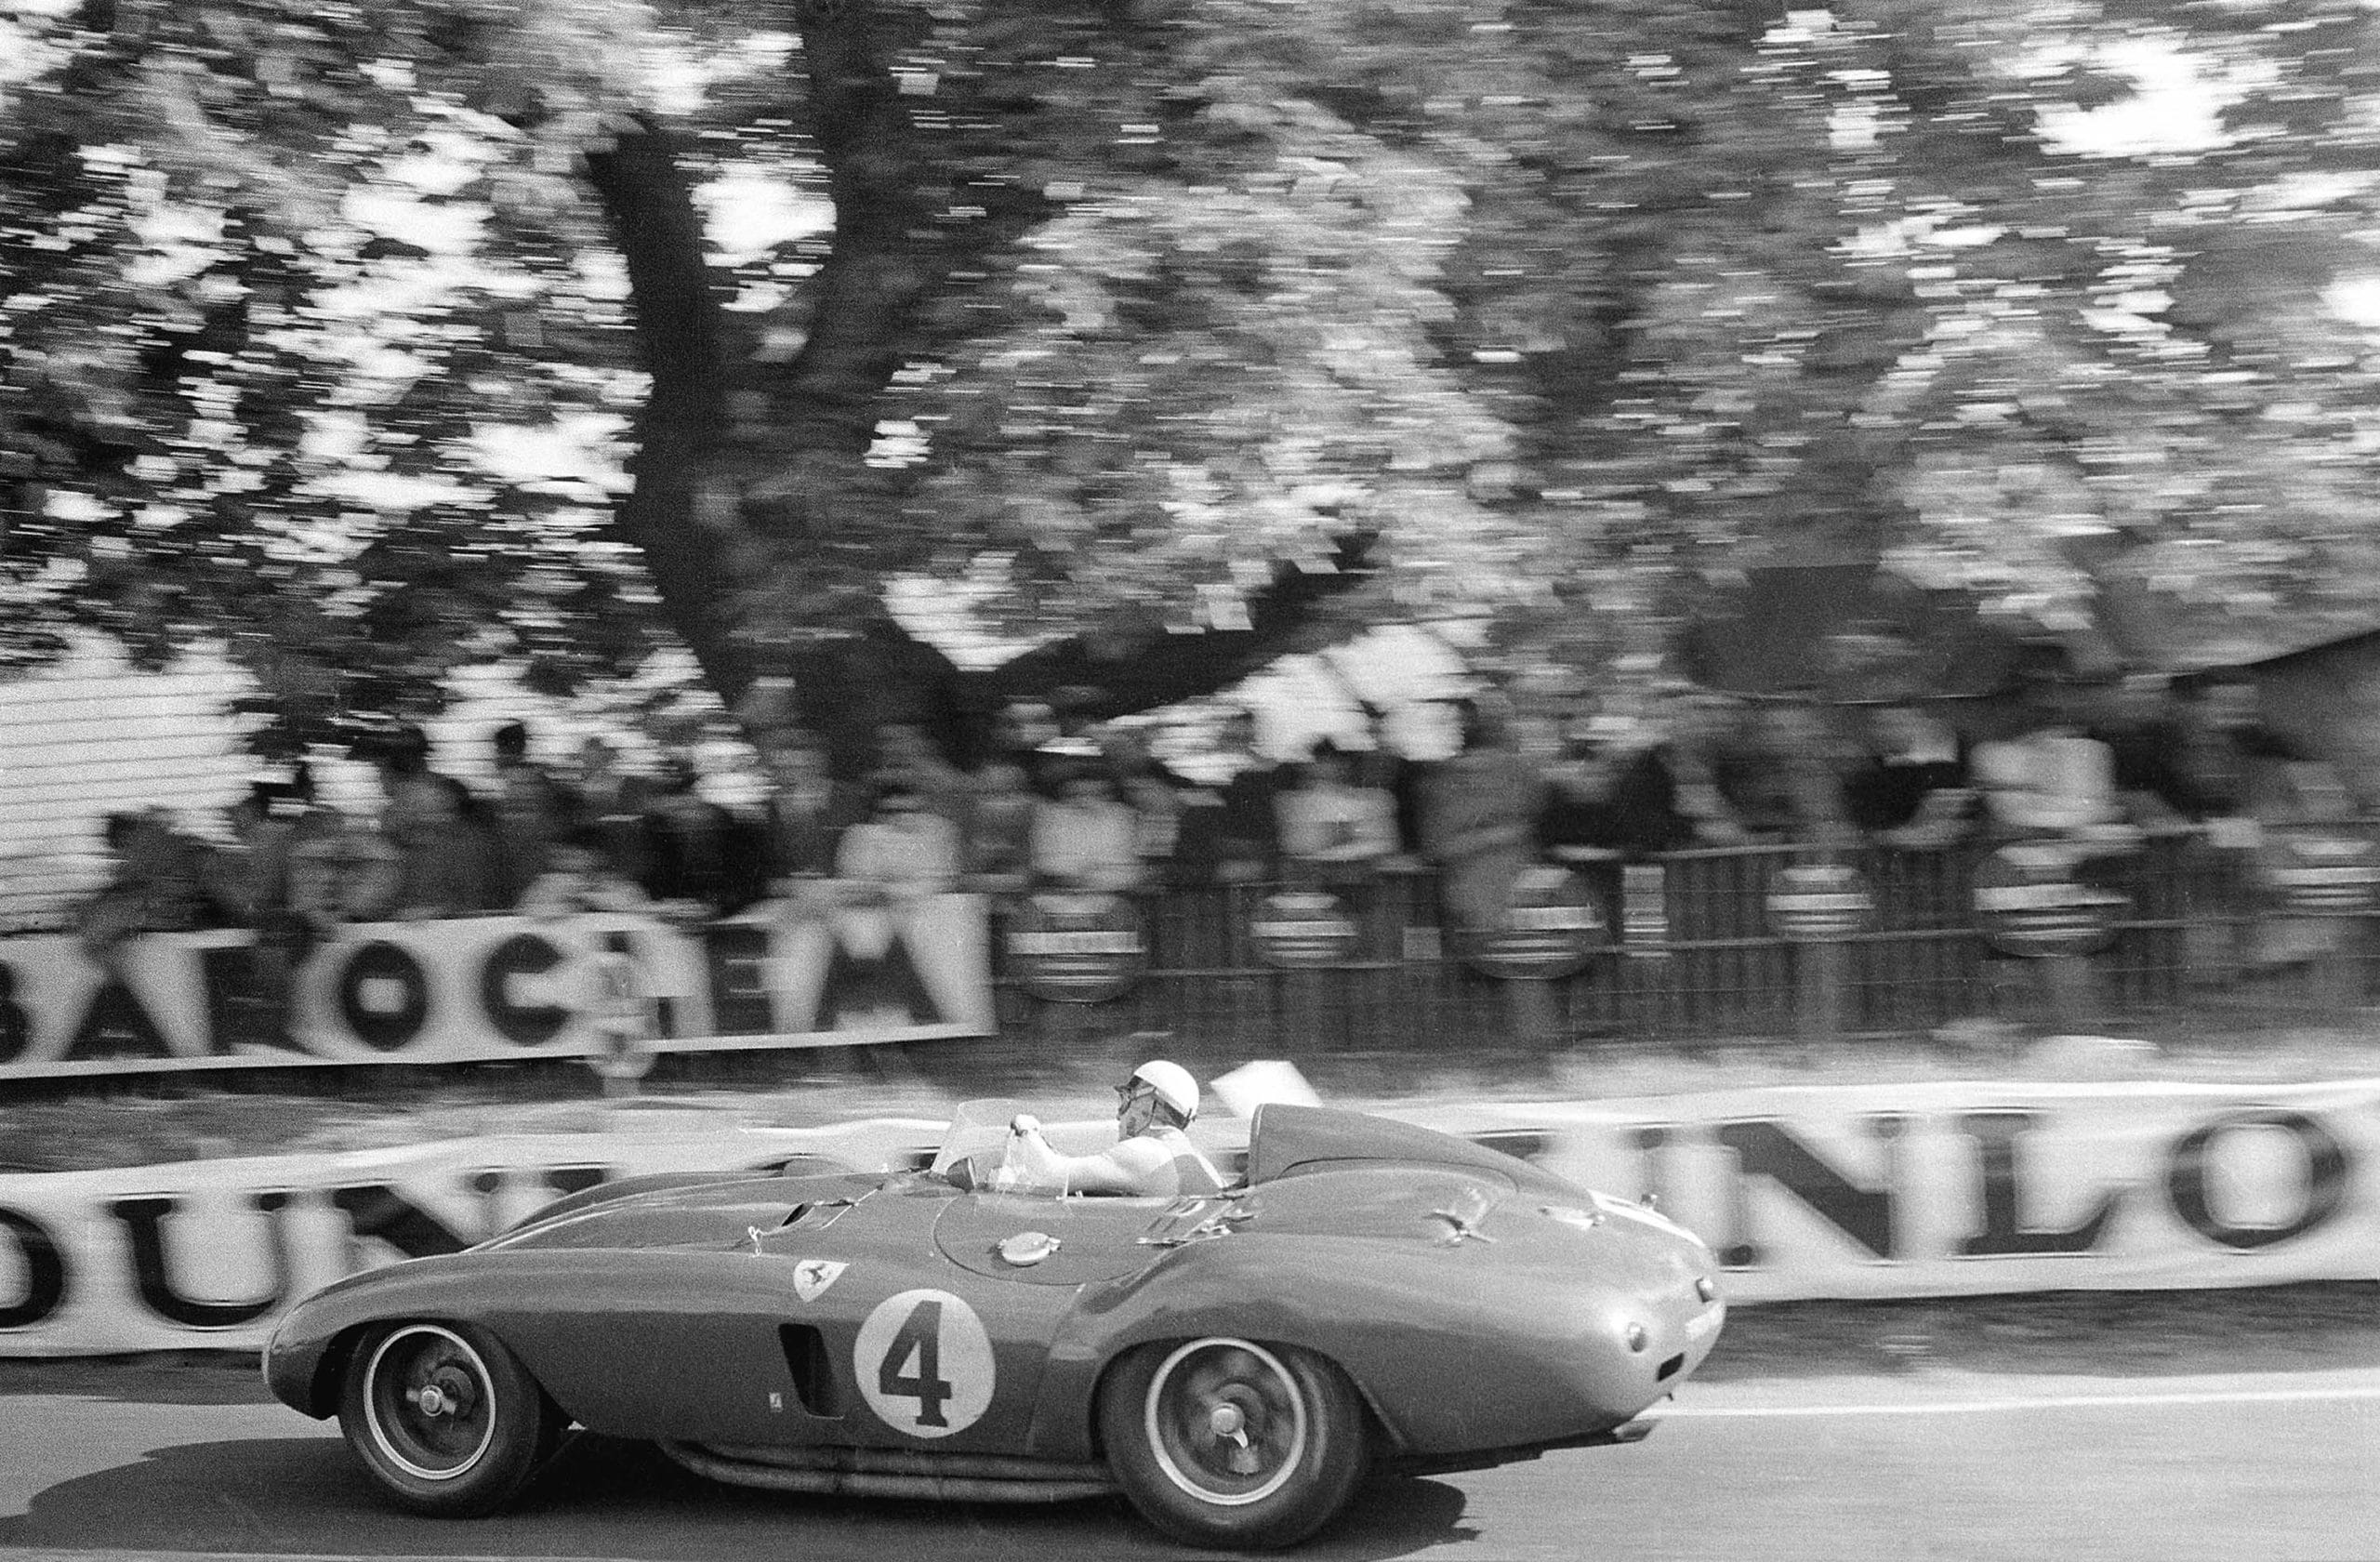 Italian driver Eugenio Castellotti at Tertre Rouge in the early laps of the 24 Hours of Le Mans race, June 1955. He shared this Ferrari 121LM with Paolo Marzotto. (Photo by Klemantaski Collection/Getty Images)